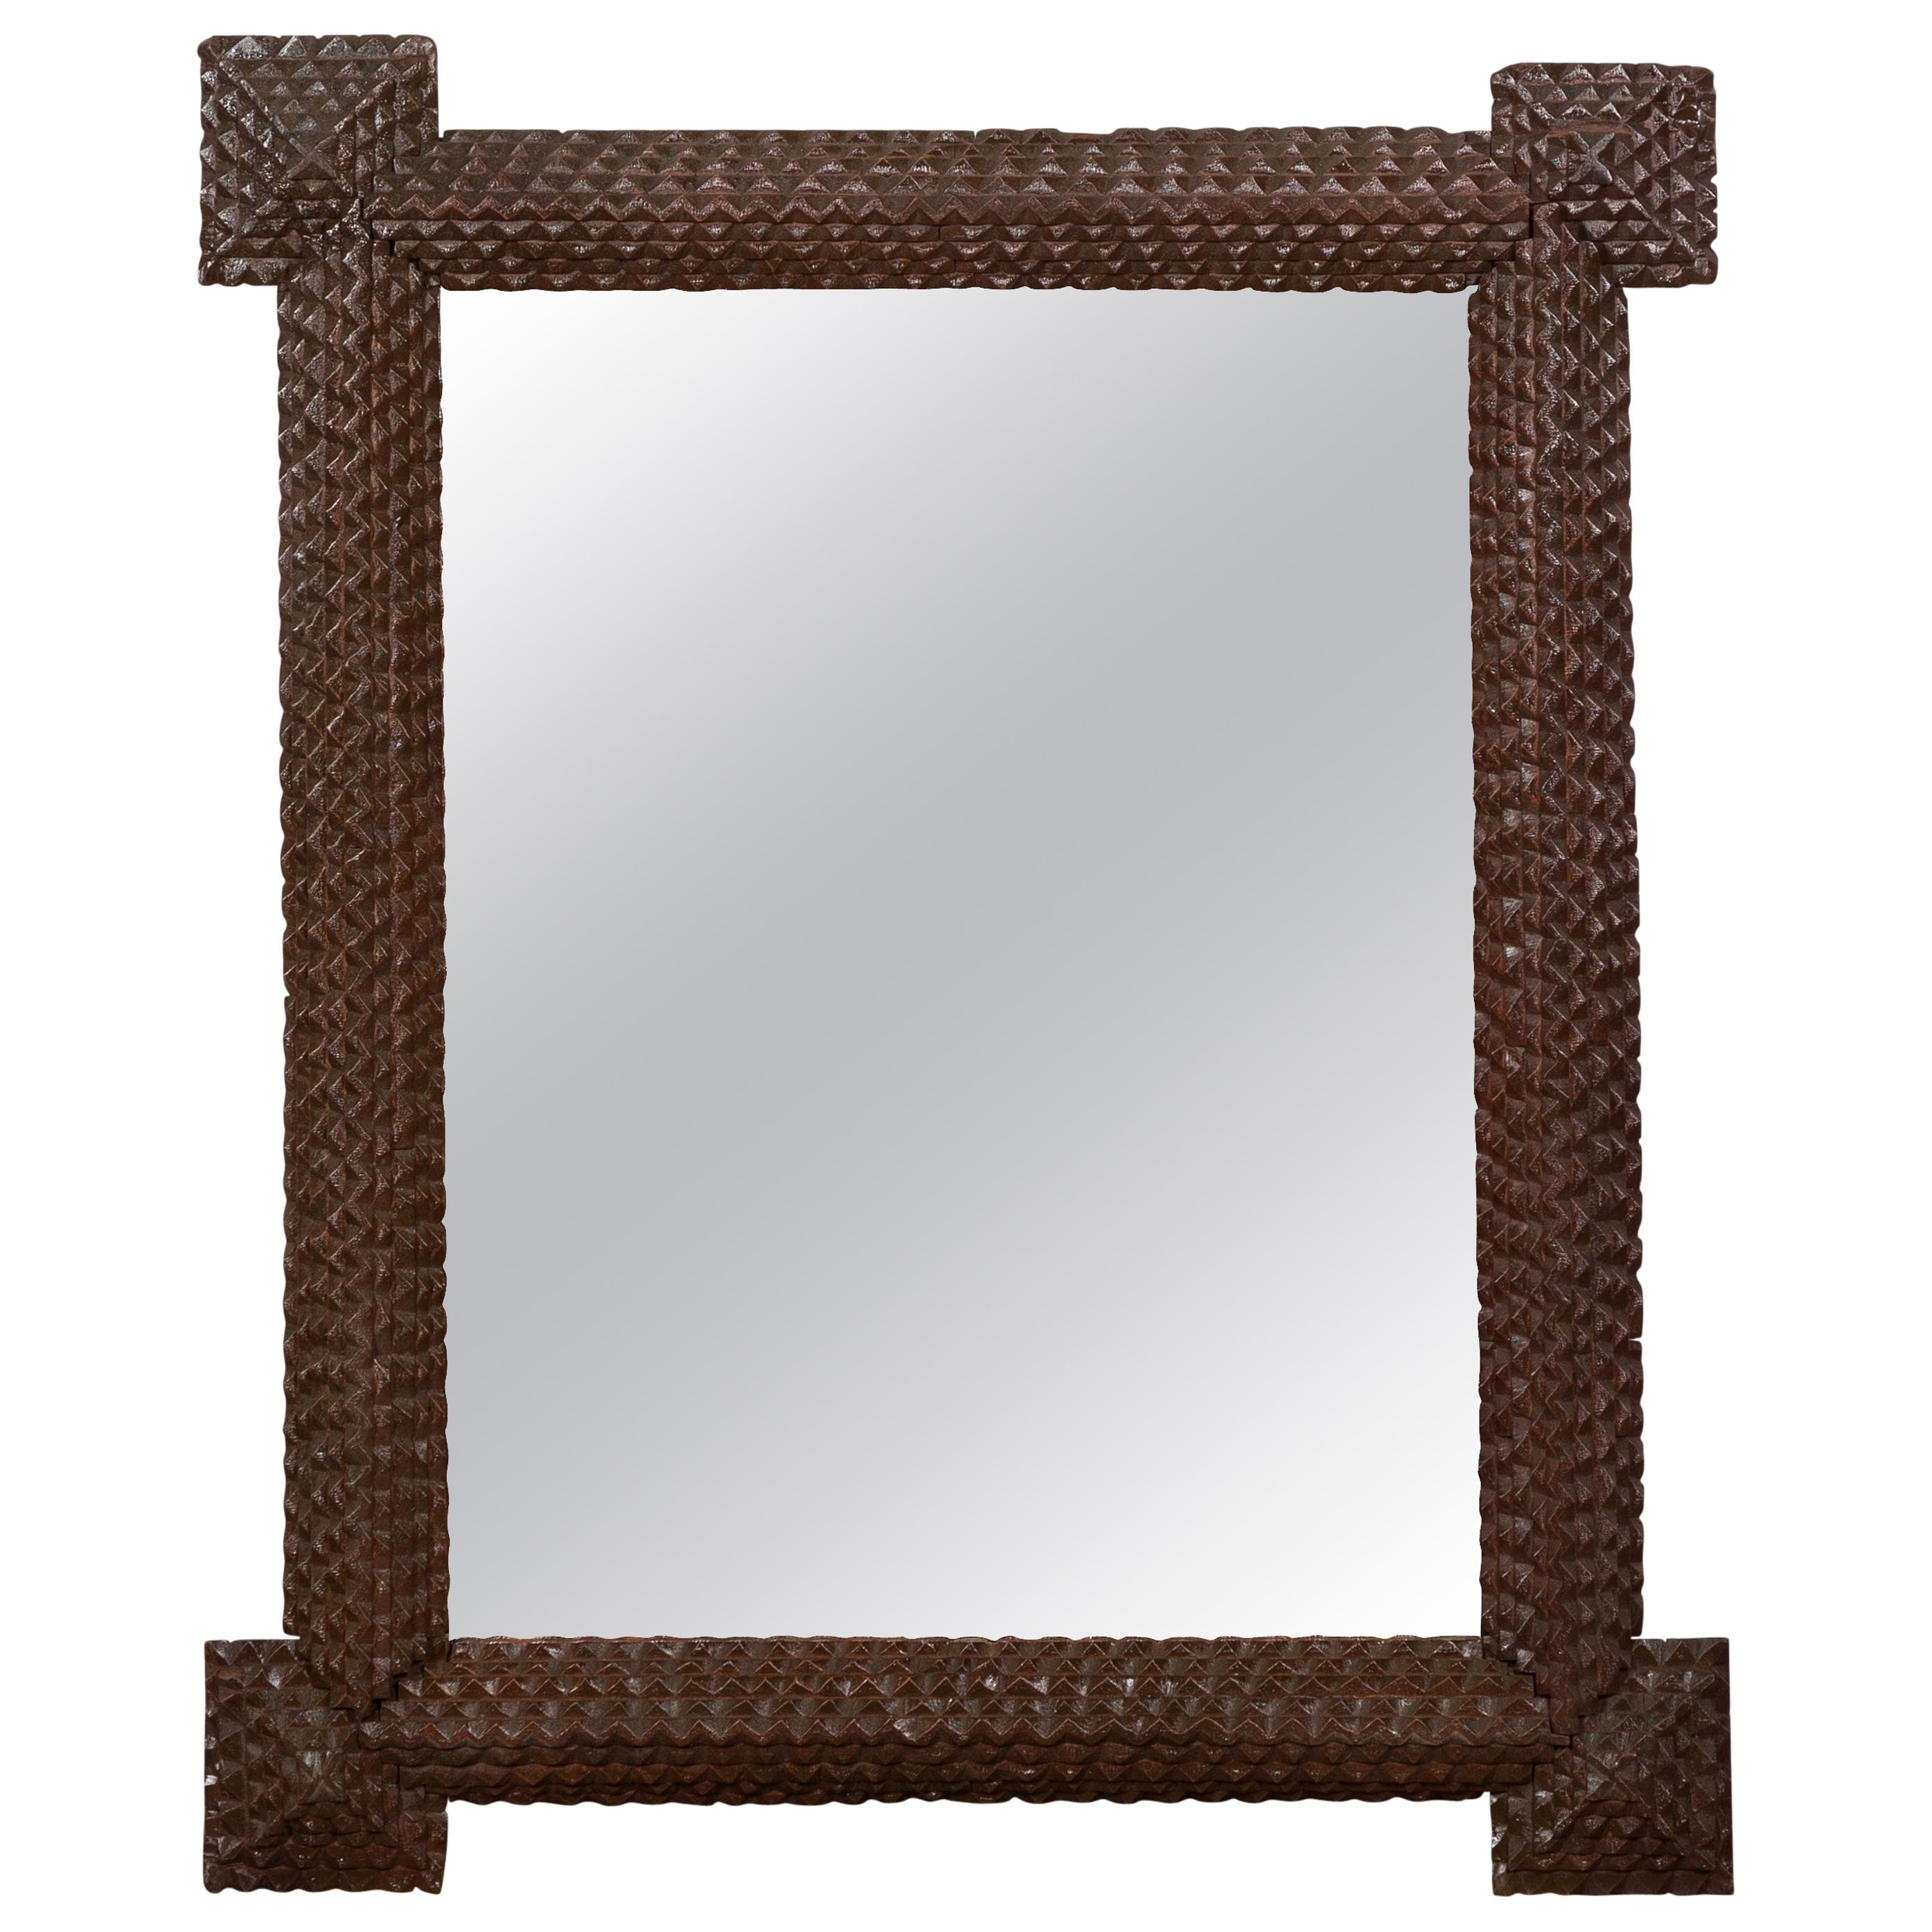 French 1900s Tramp Art Mirror with Protruding Corners and Pyramidal Motifs